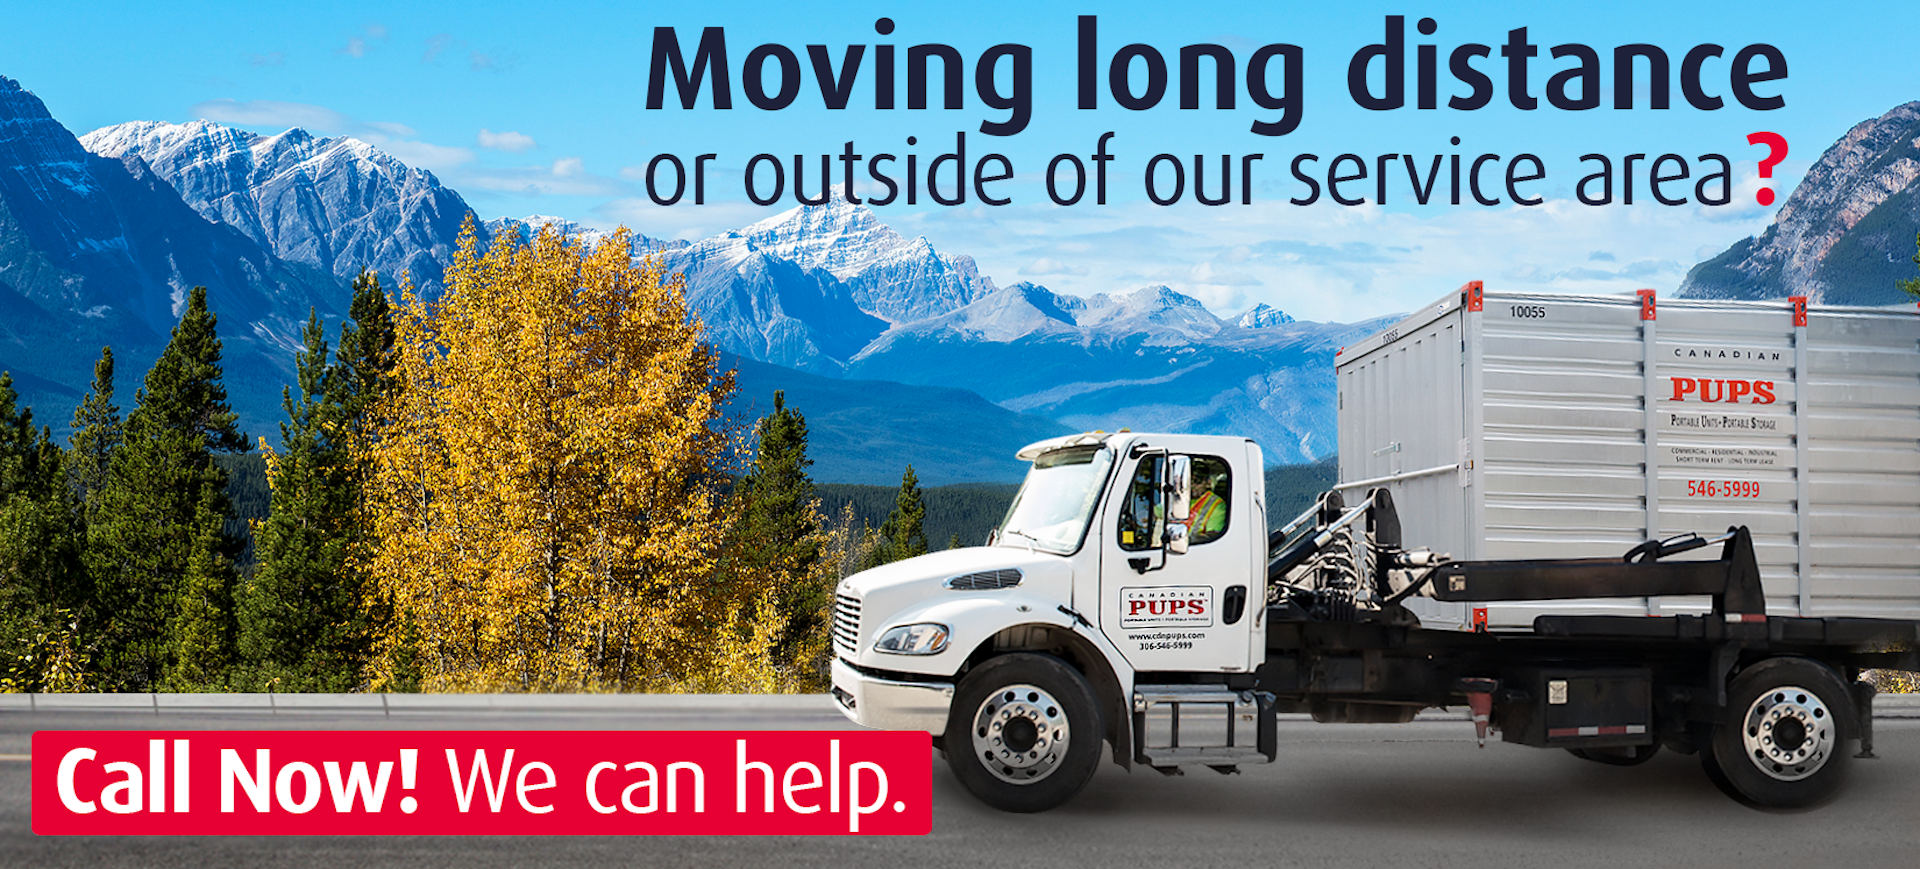 Moving long distance or outside of our service area?